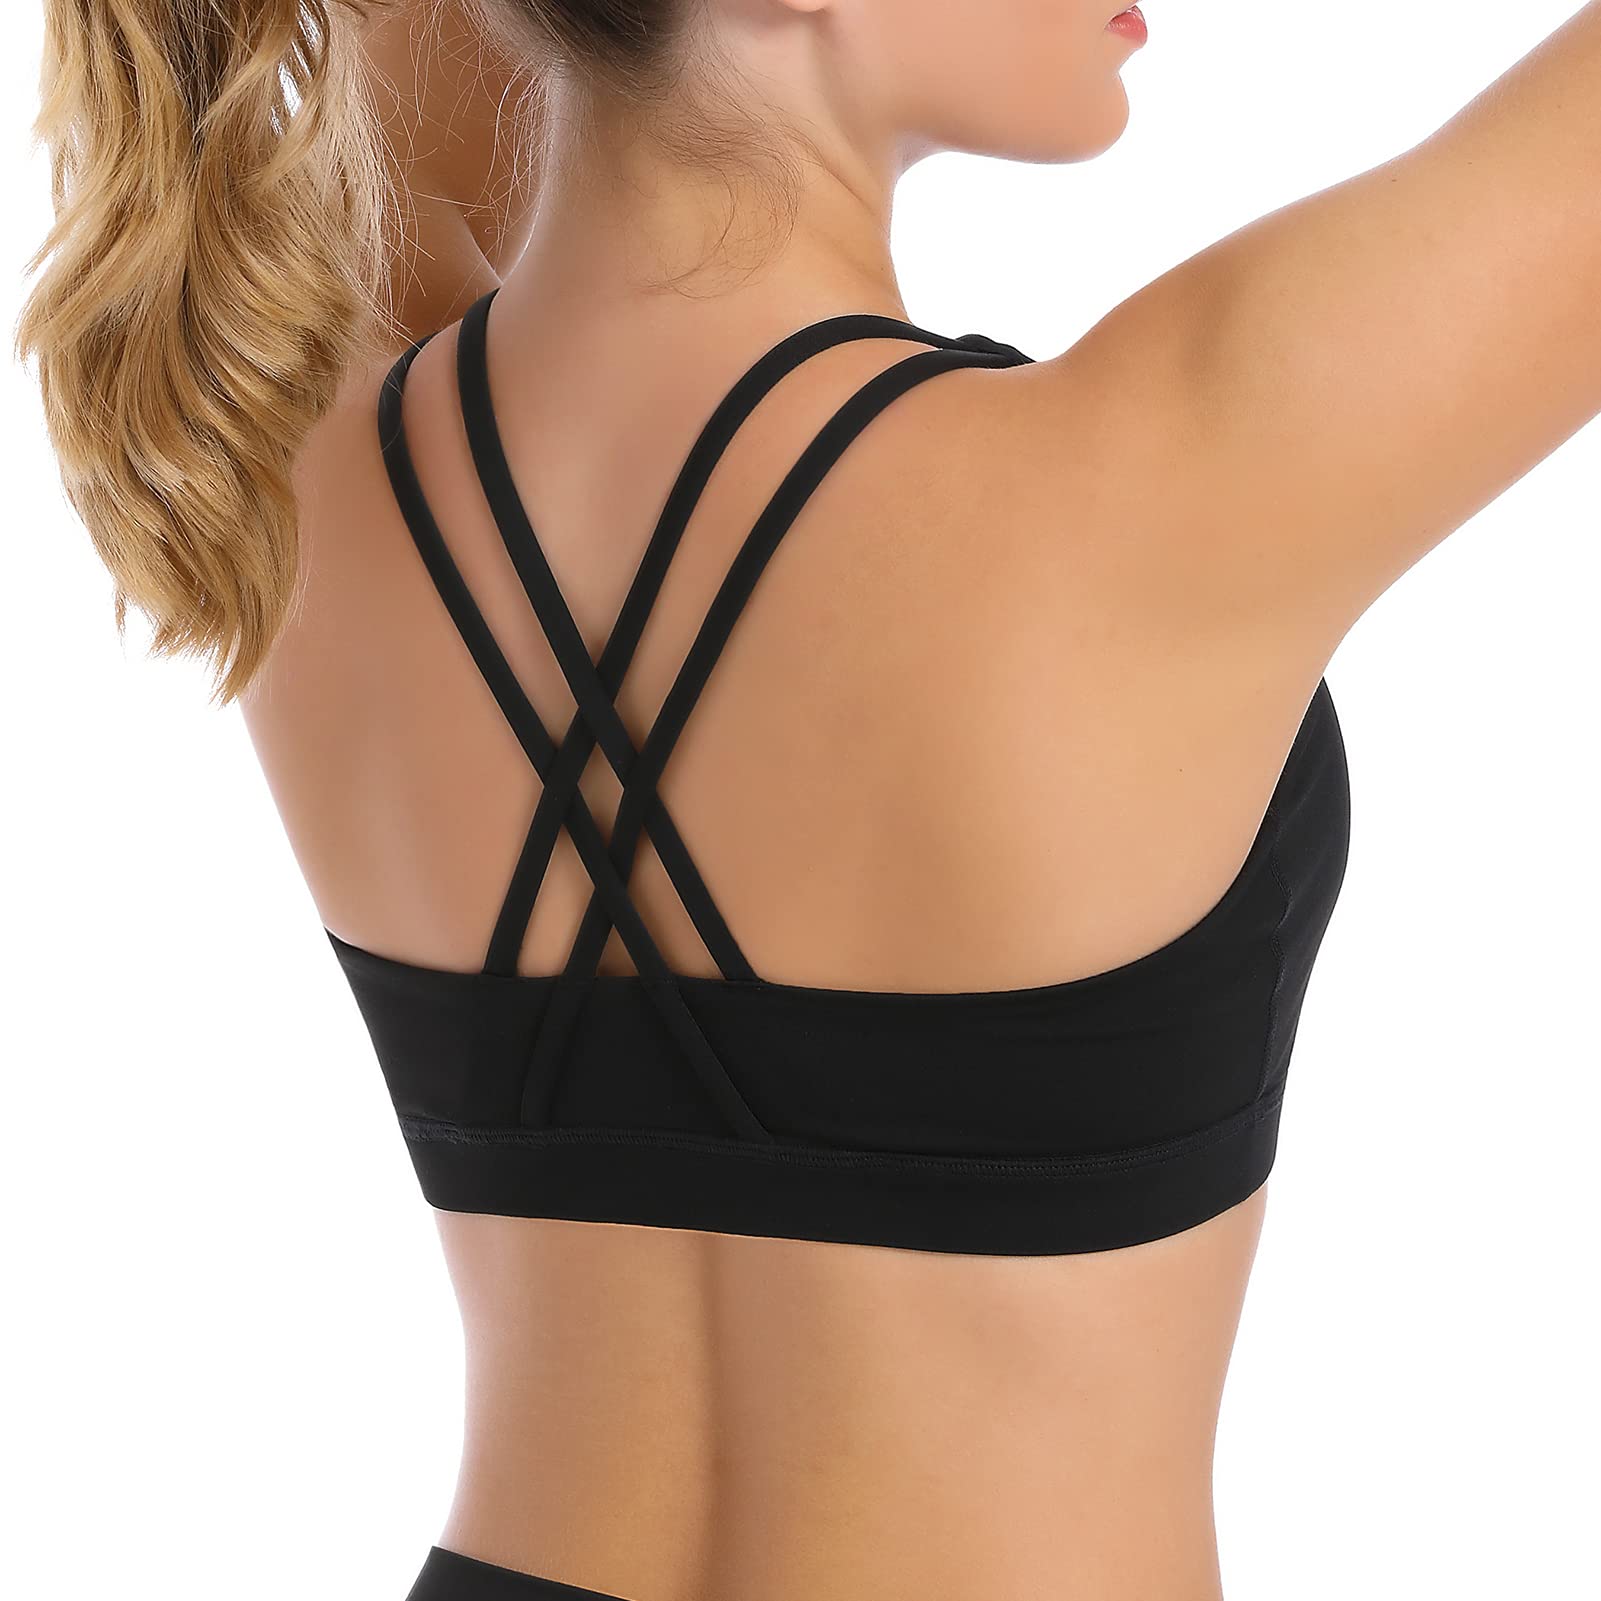 Buy amybaby Sports Bras for Women, Criss-Cross Back Padded Strappy